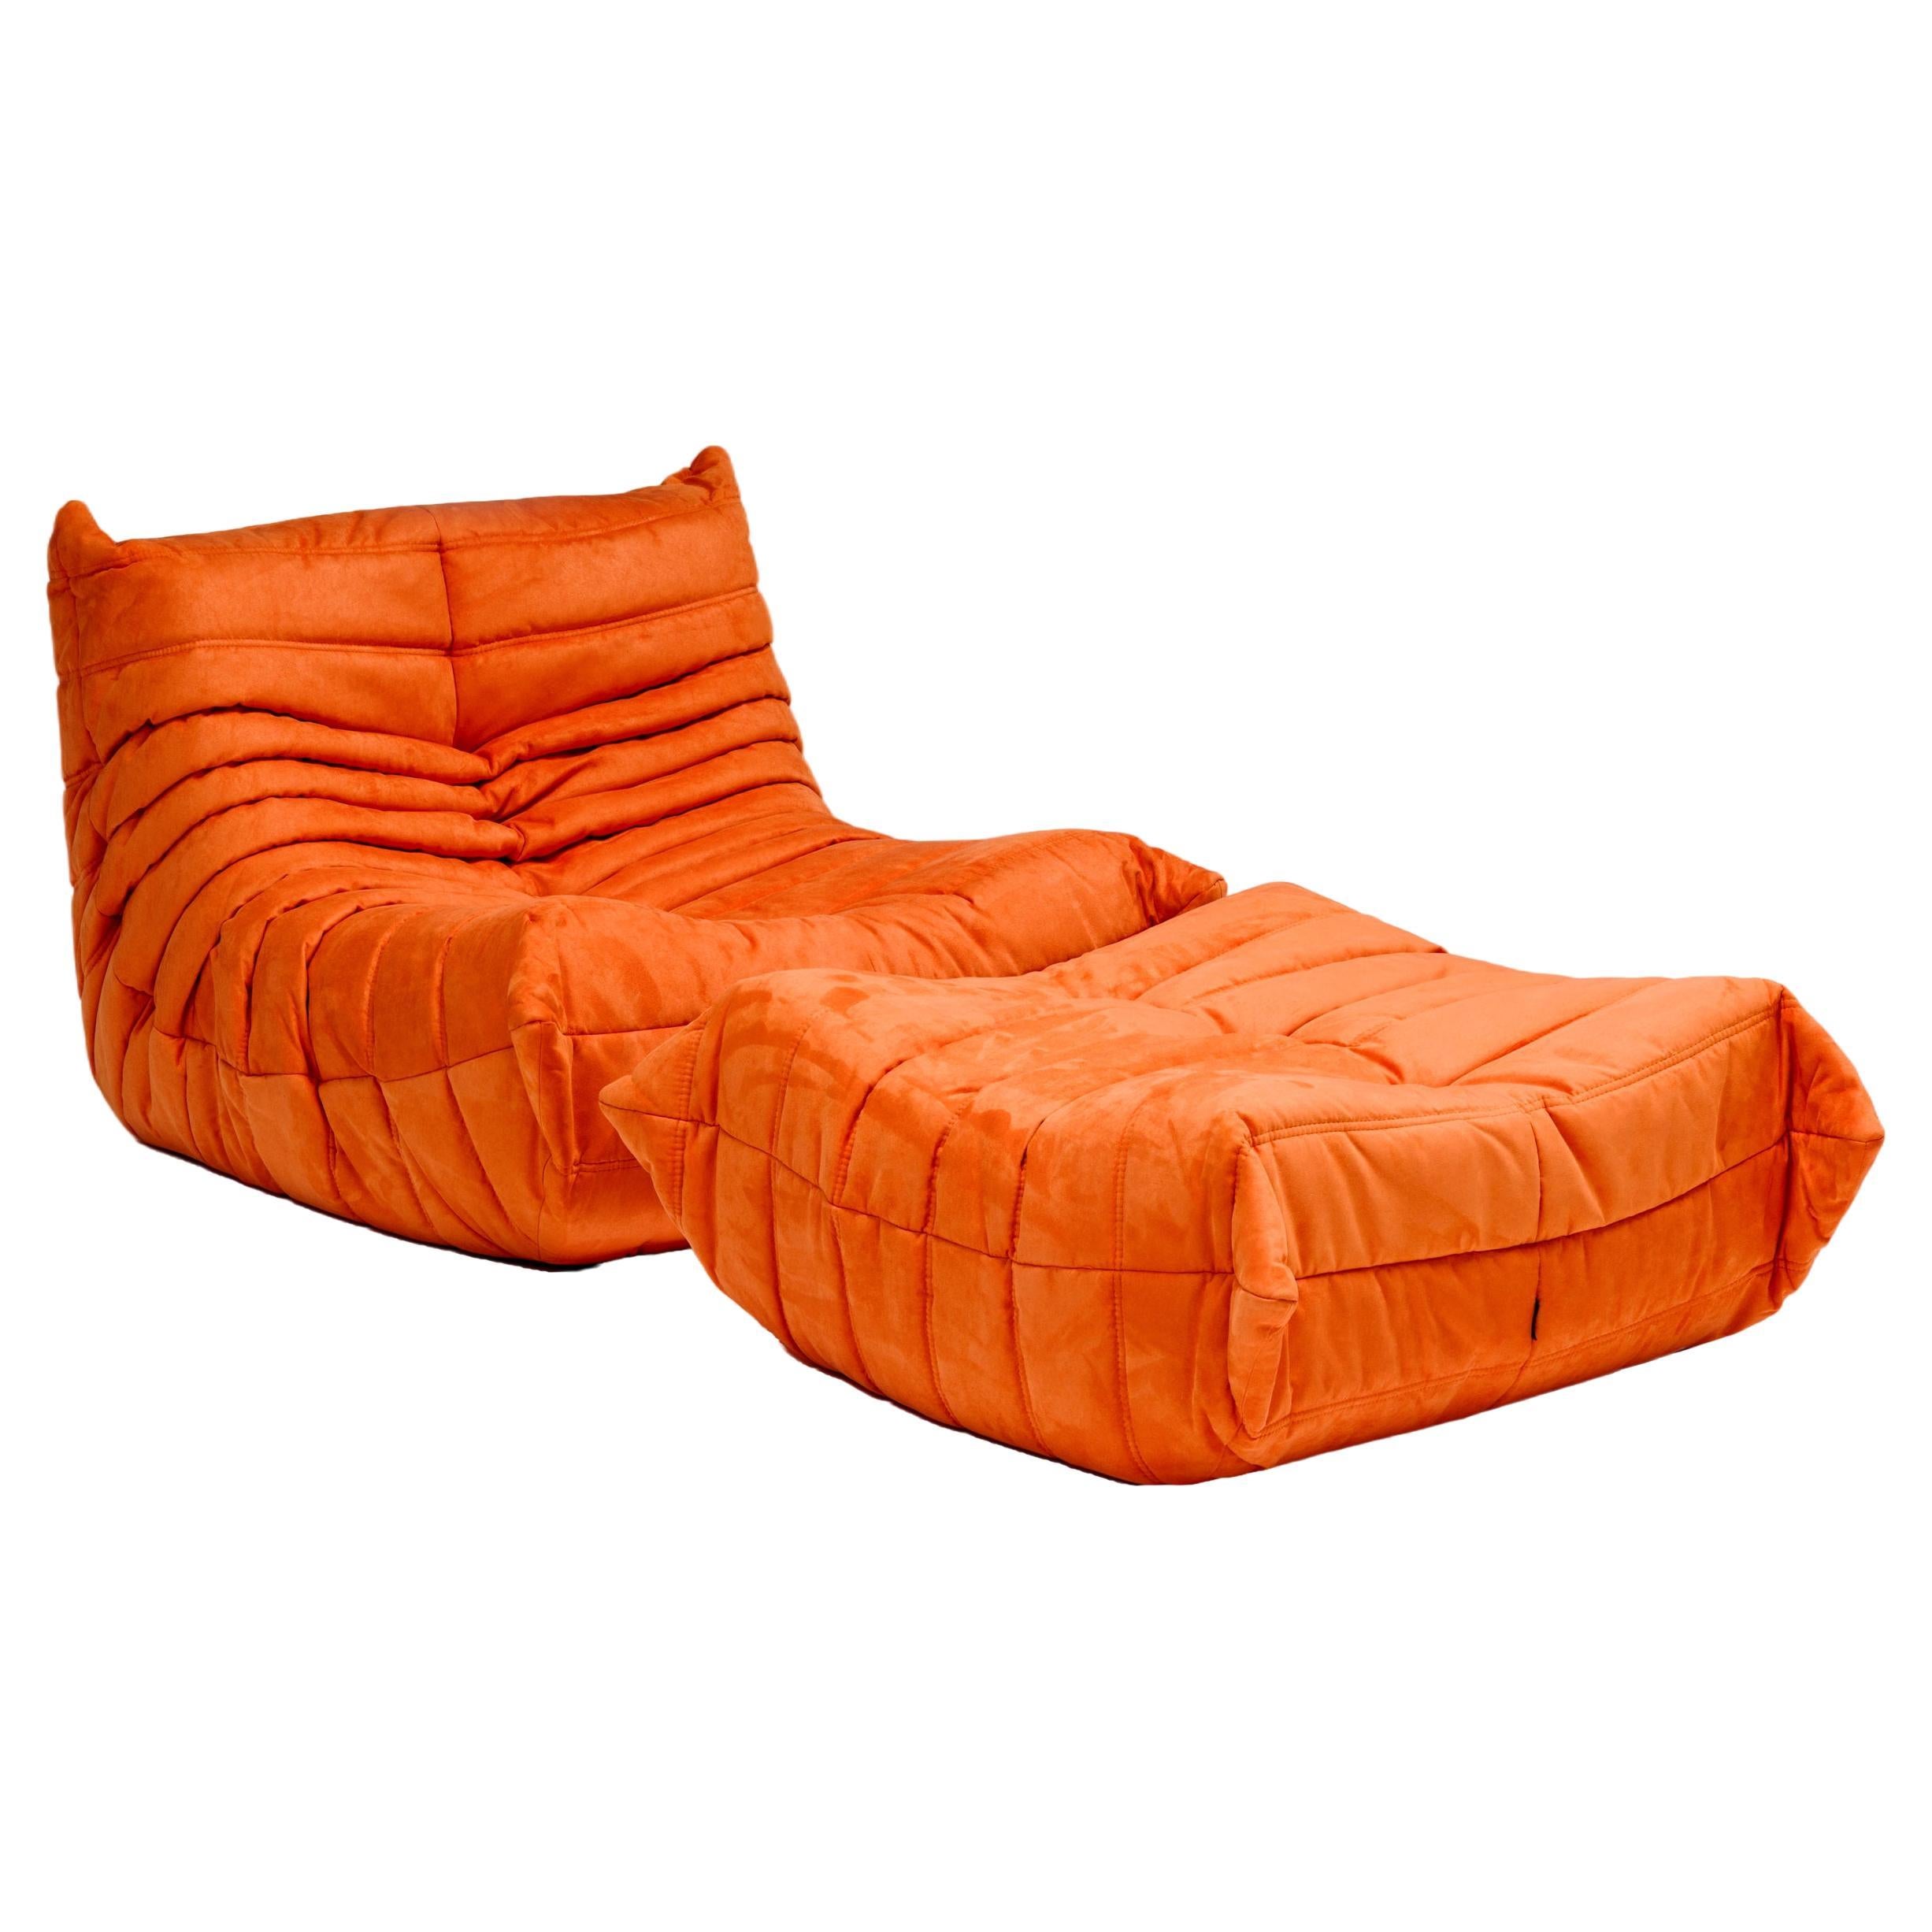 What is a Togo sofa made of?